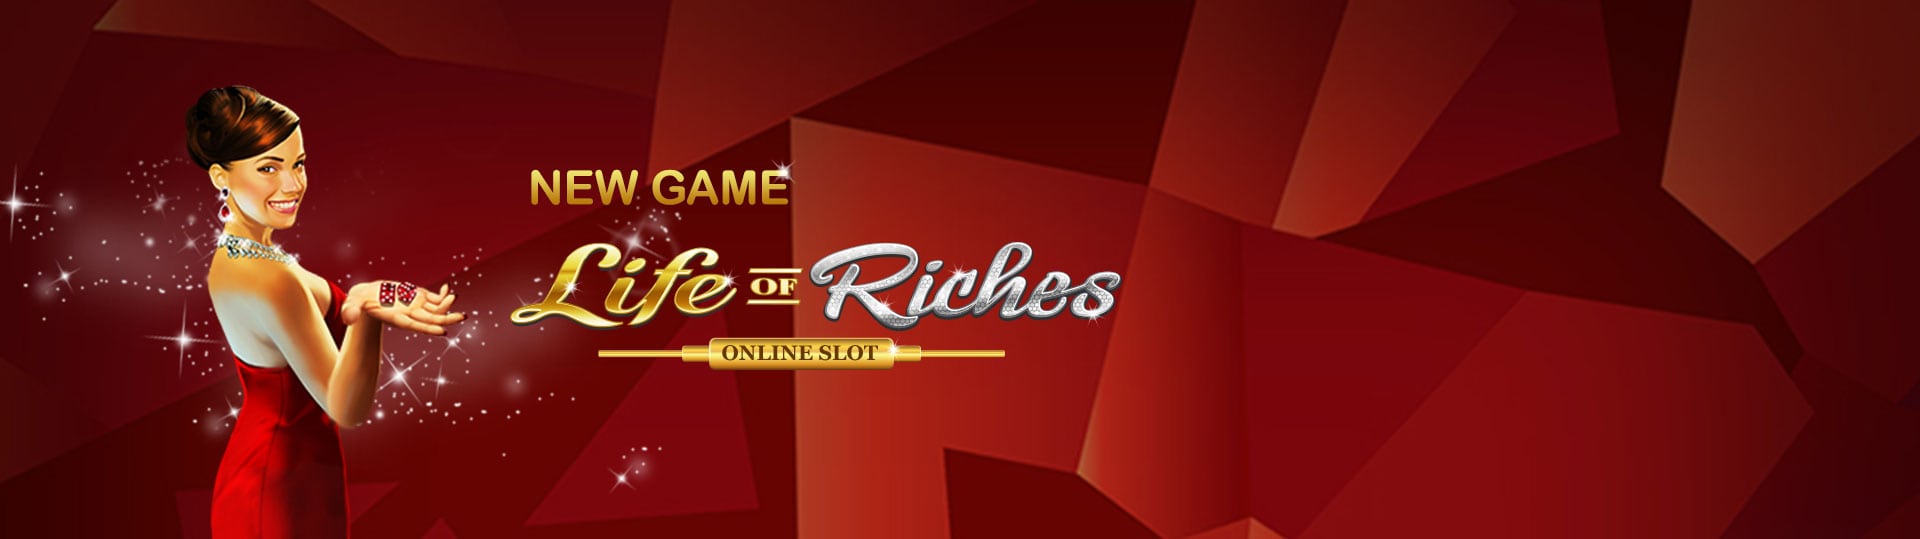 Riches Slots 